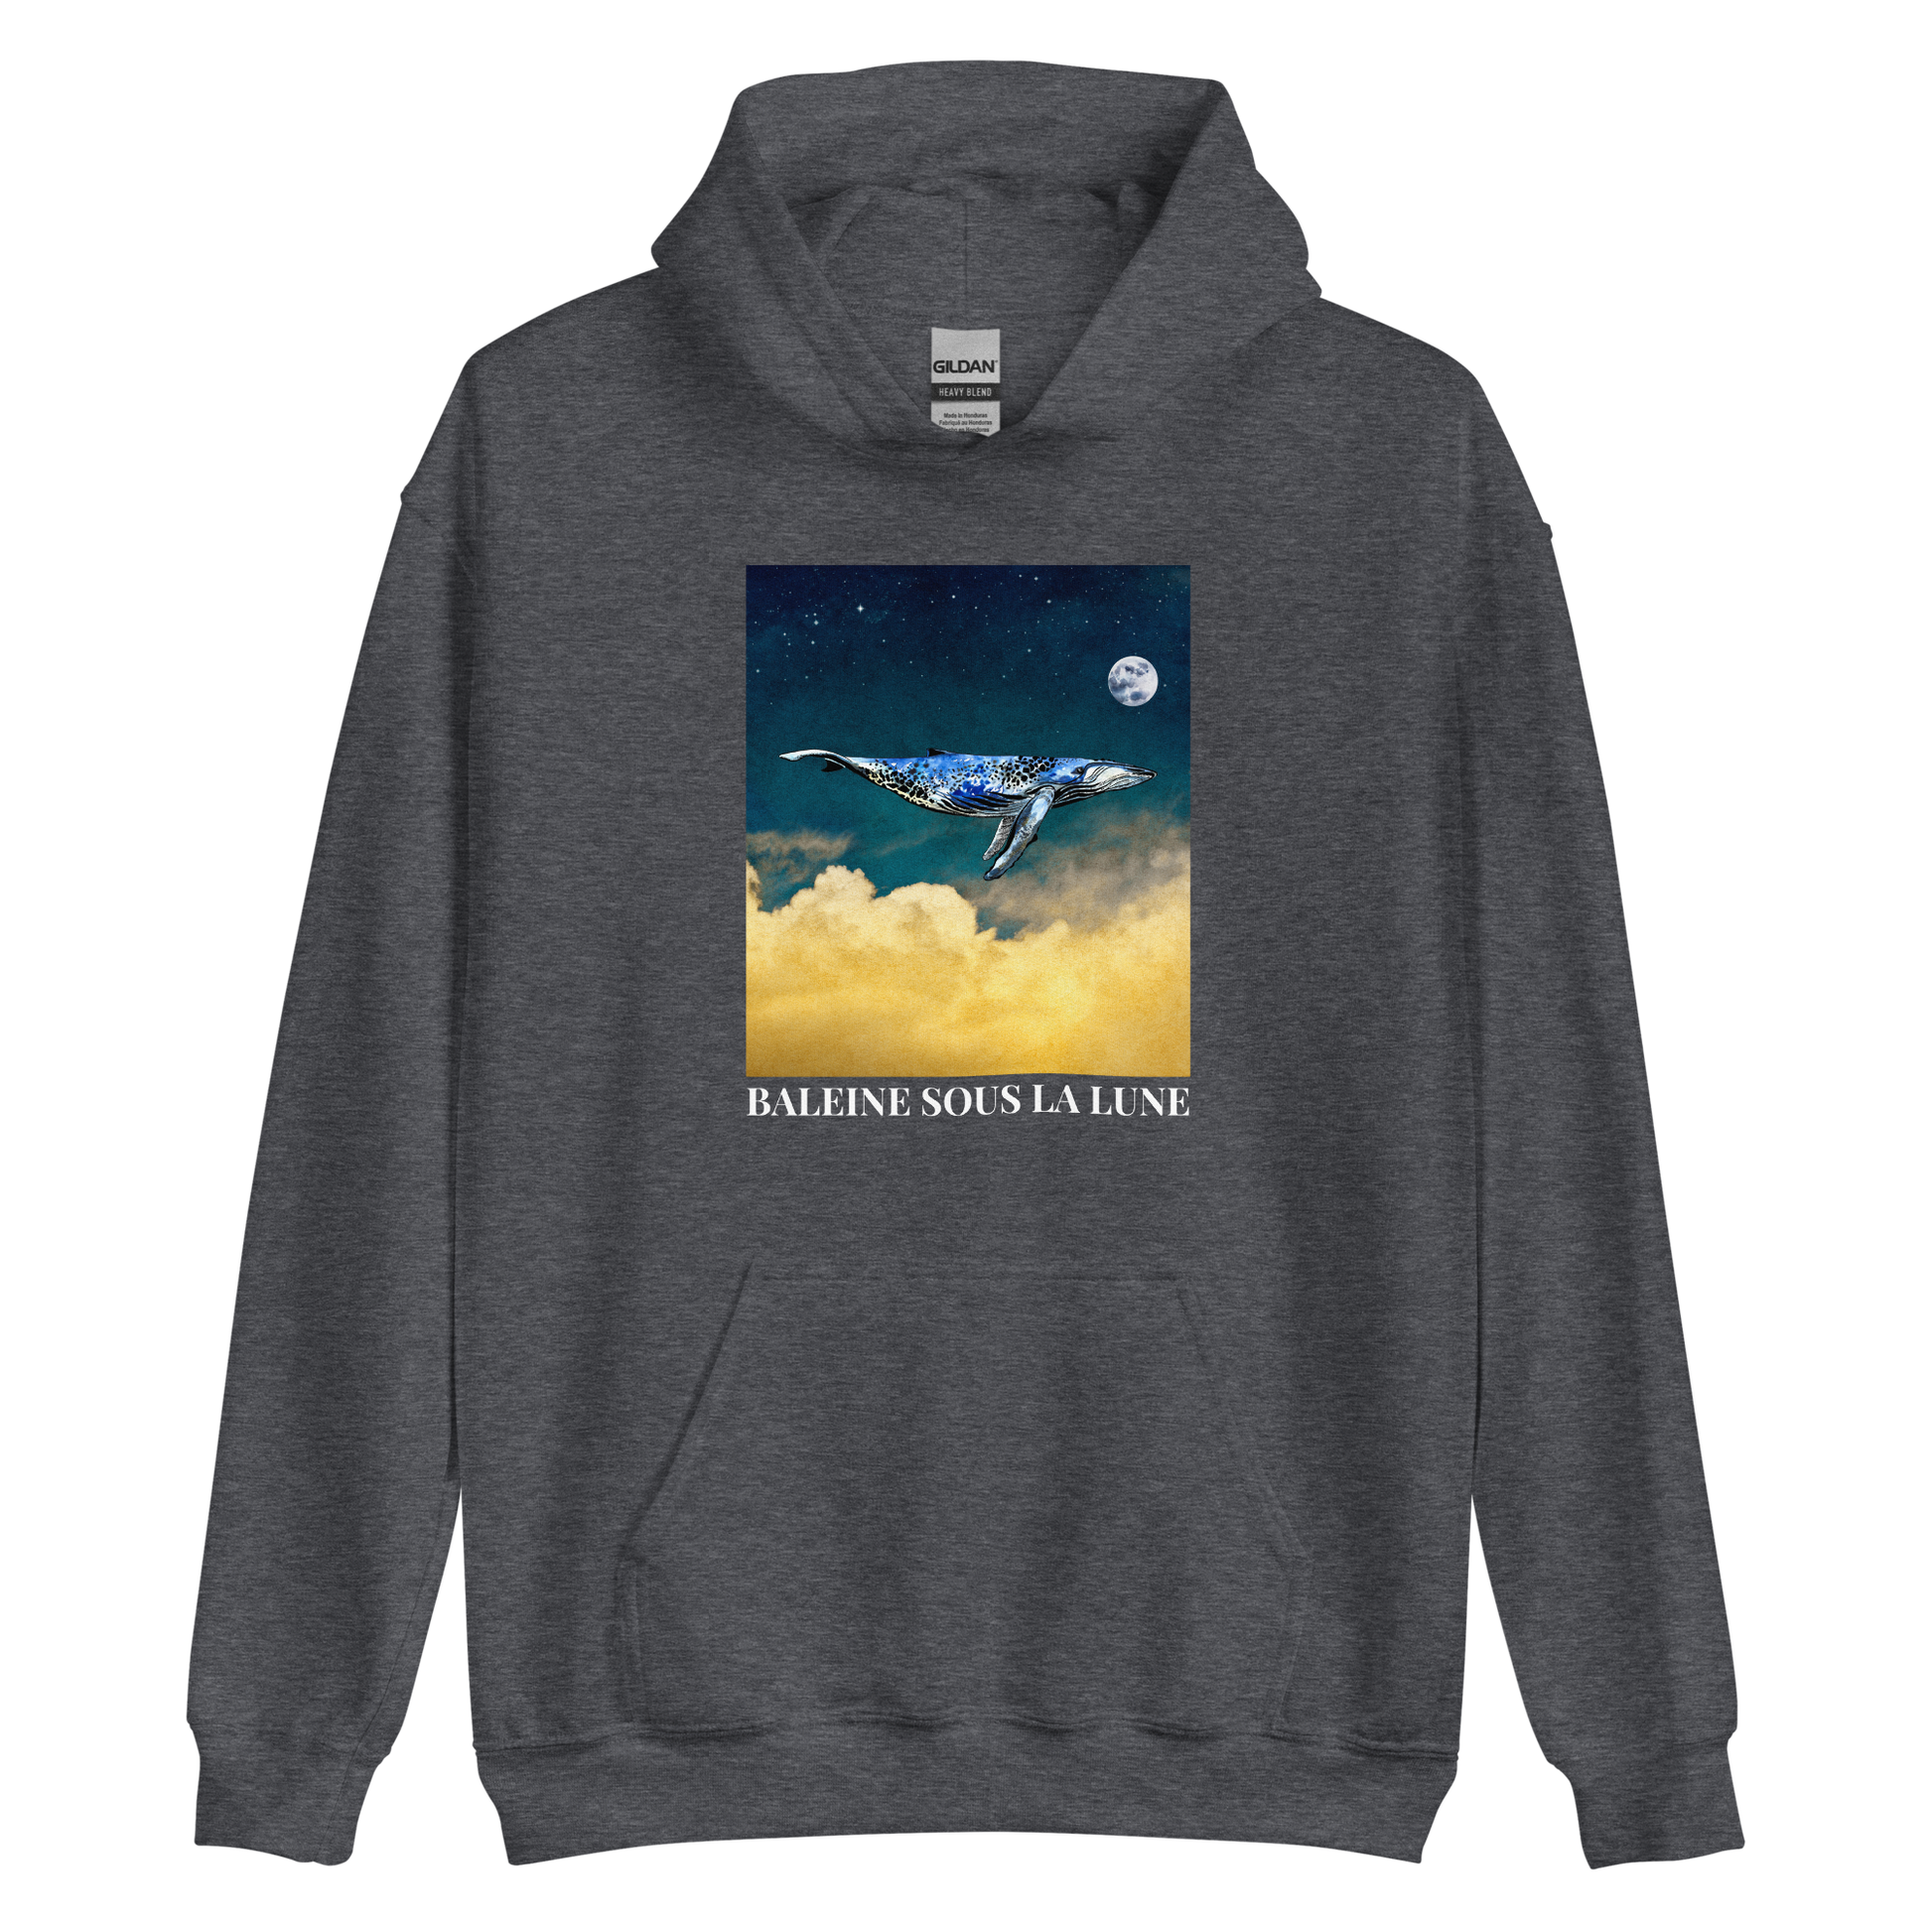 Dark Heather Whale Hoodie featuring a charming Whale Under The Moon graphic on the chest - Cool Graphic Whale Hoodies - Boozy Fox